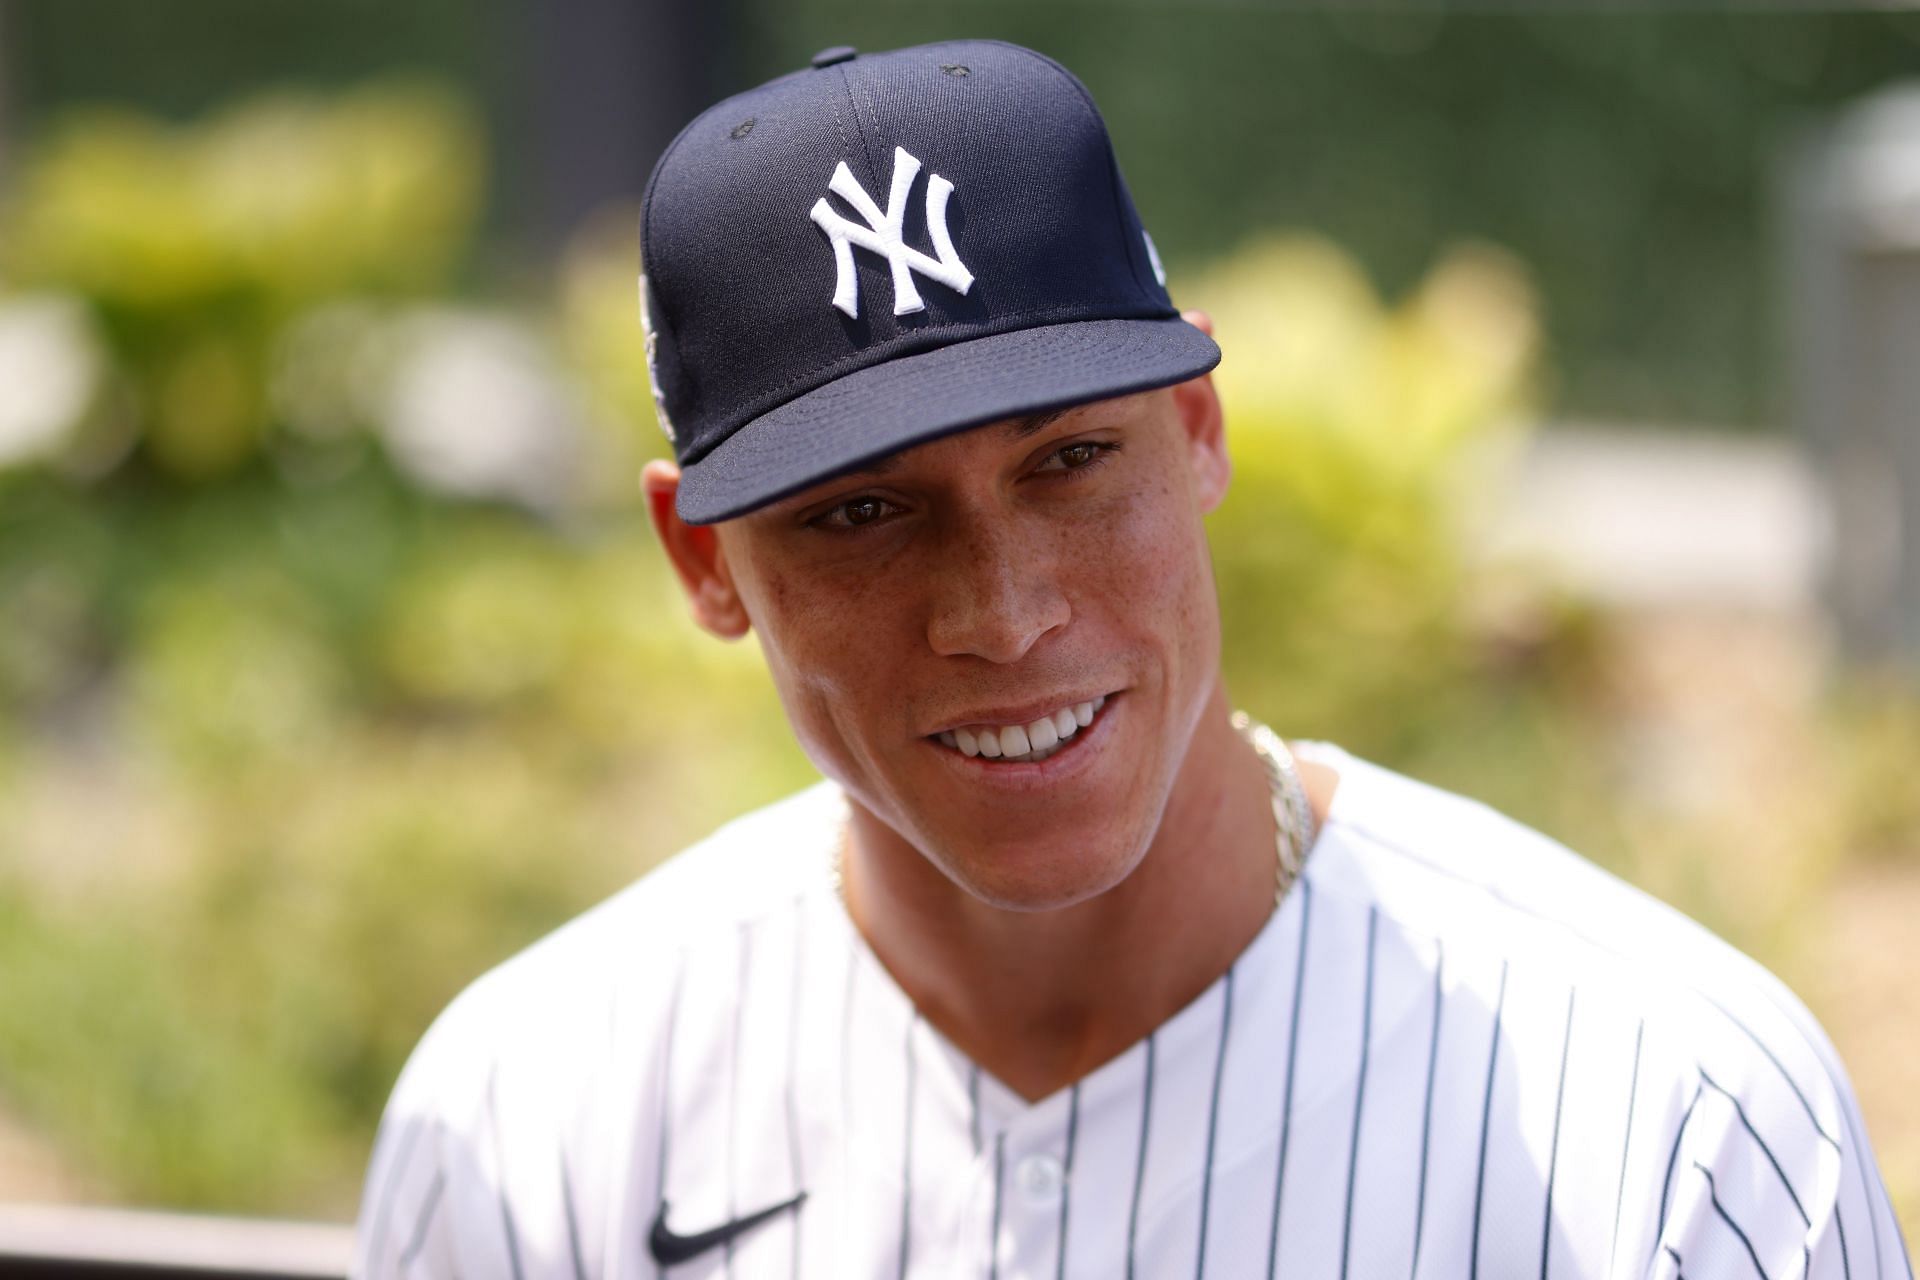 Hoch] Aaron Judge: “Very few people get this opportunity to talk extension.  Me getting this opportunity is something special and I appreciate the  Yankees wanting to do that. But I don't mind